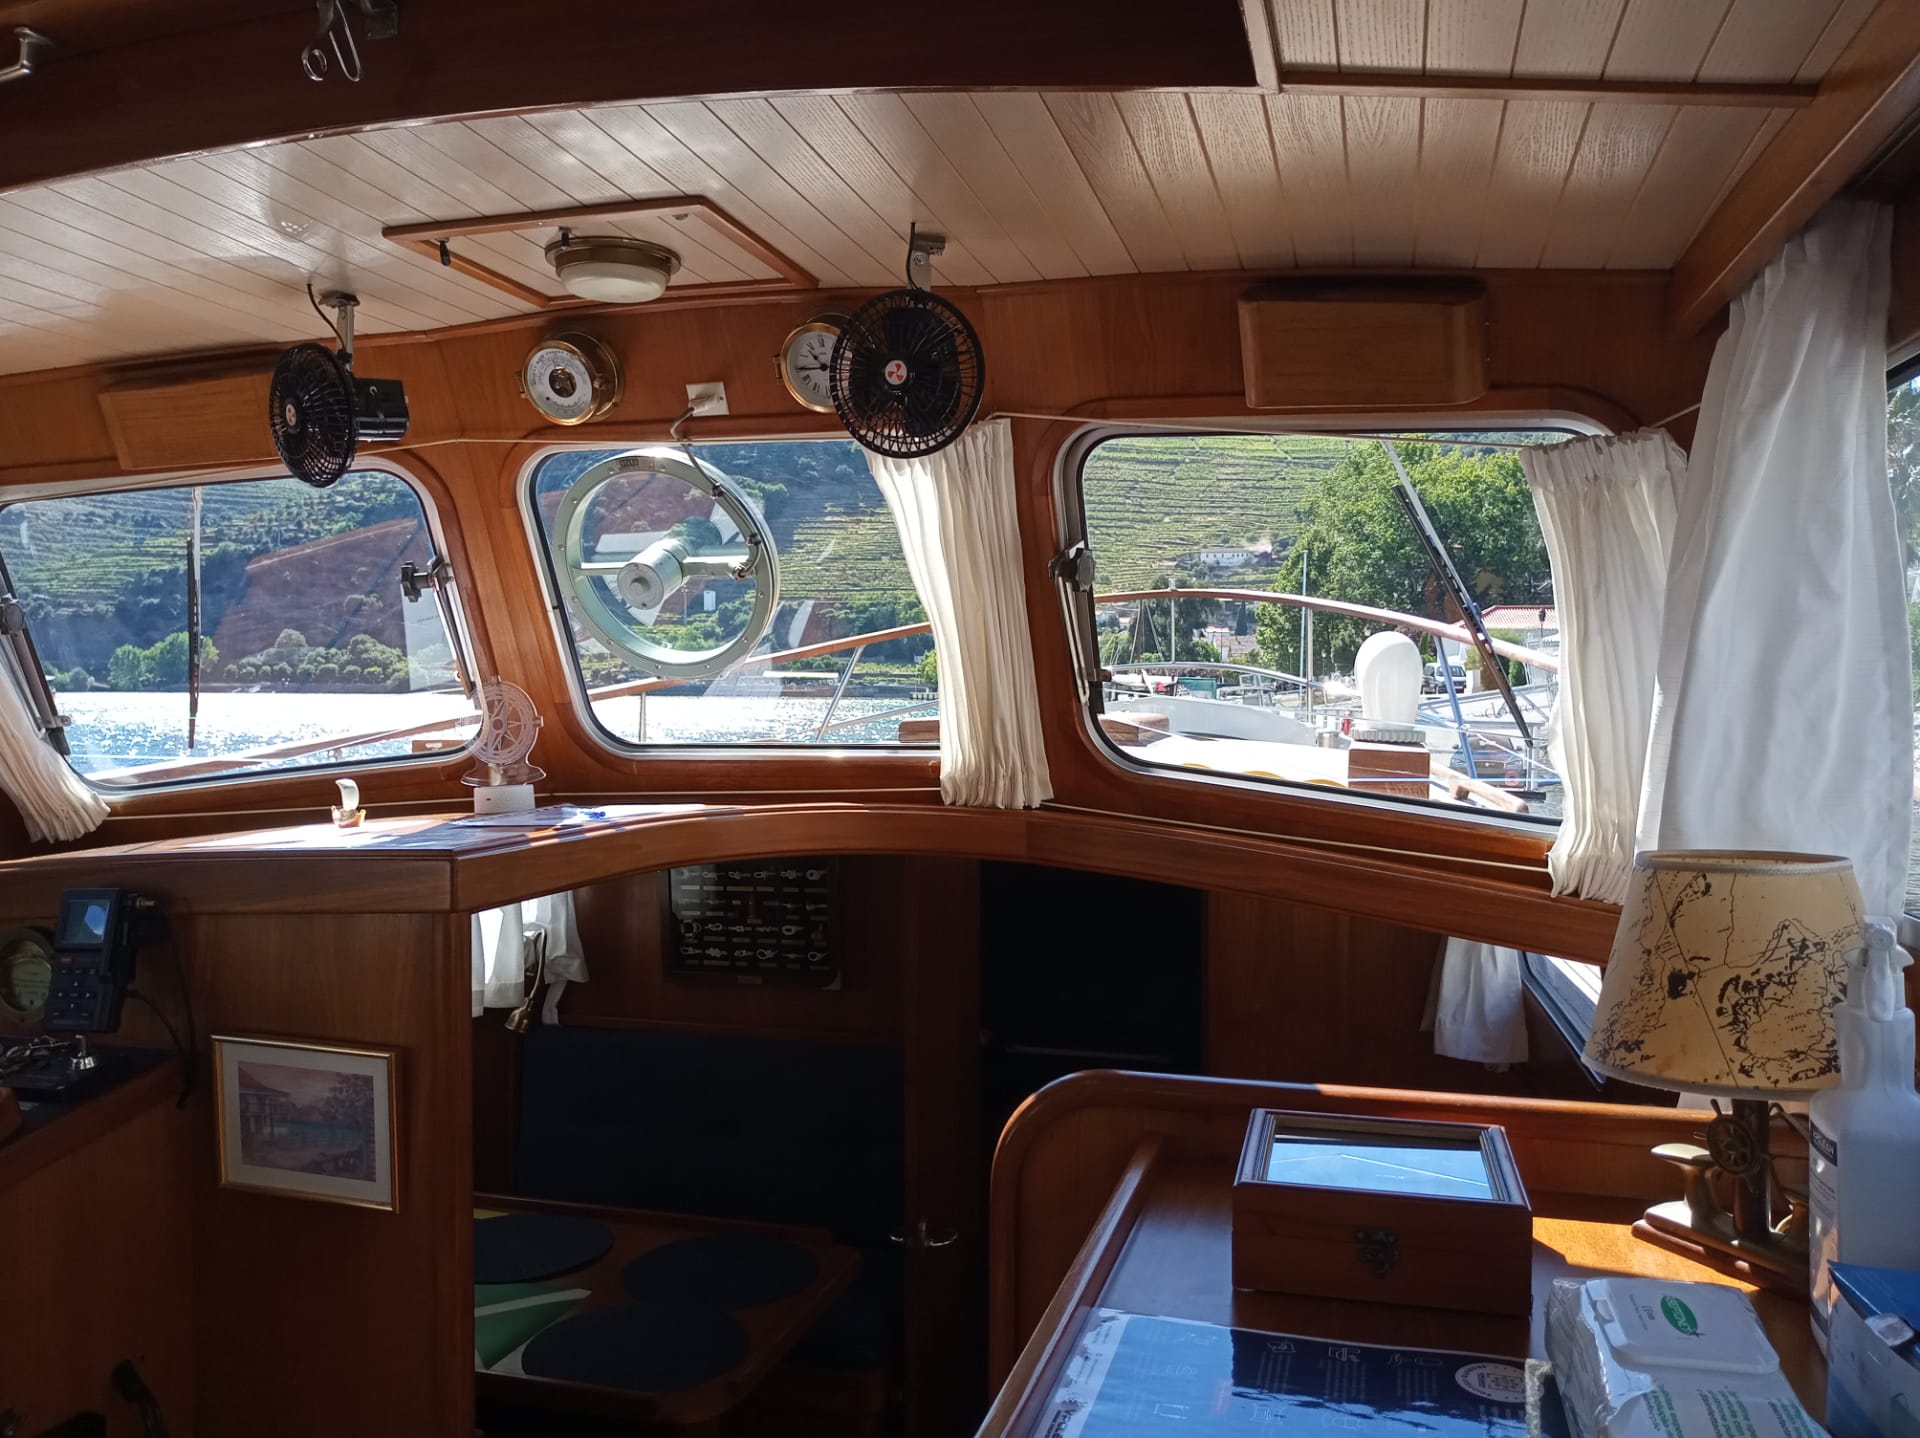 You can also enjoy the inside of the boat